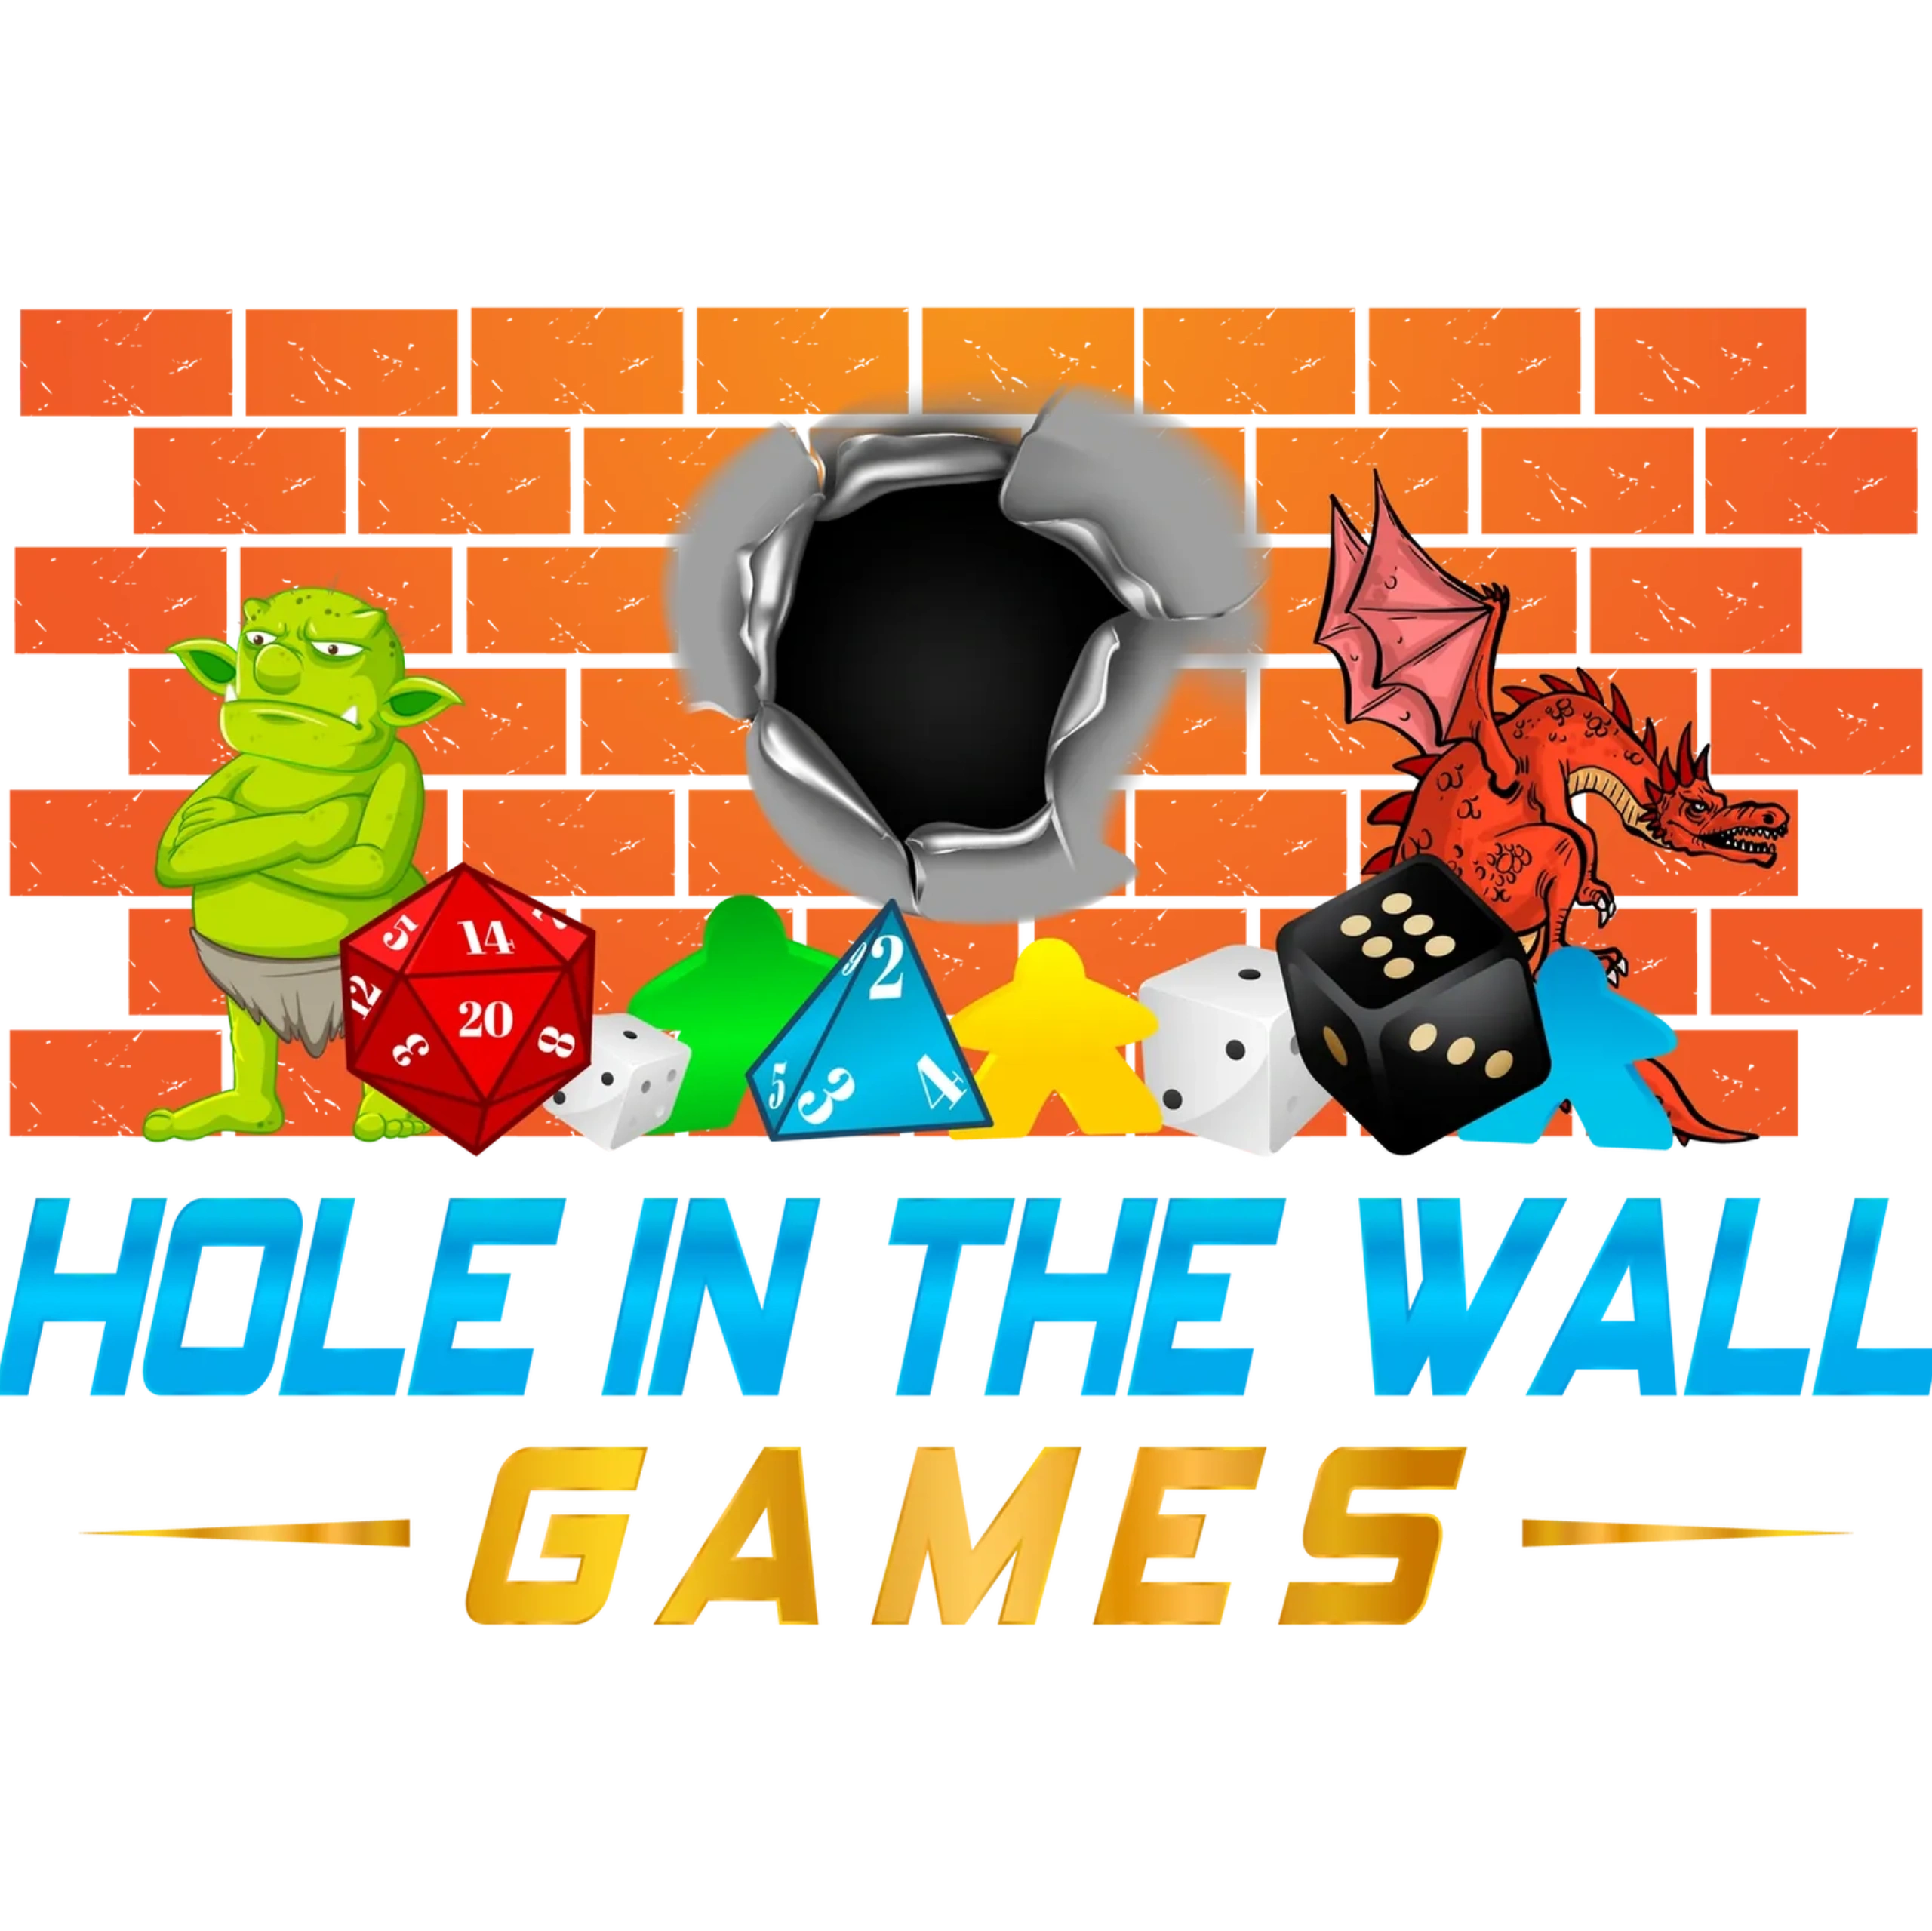 Make Your Own Board Game  The Hole in the Wall Gang Camp